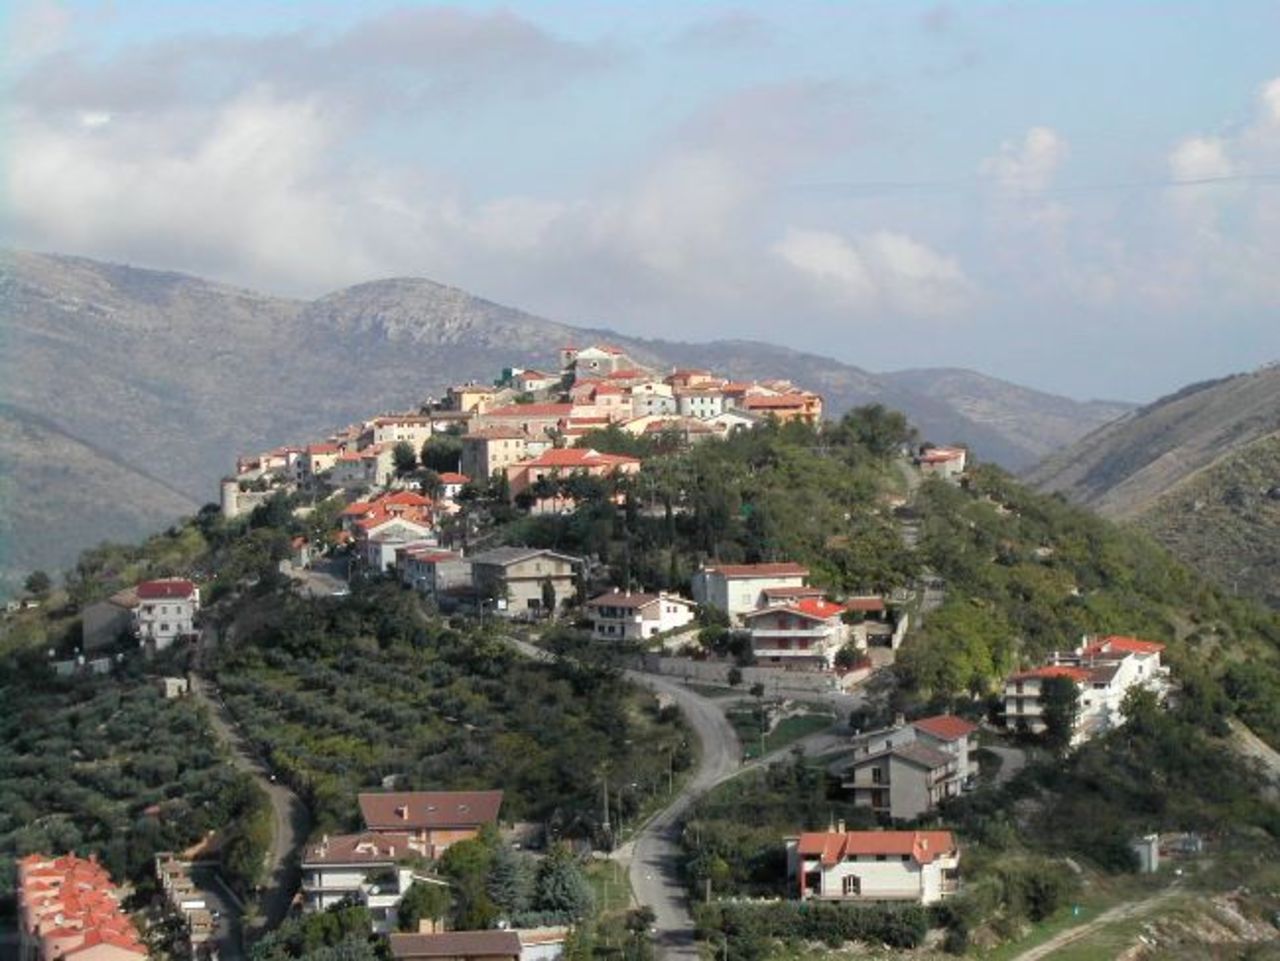 The village, with a population of about 700, is situated on a mountain top in the middle of the Aurunci Mountains.